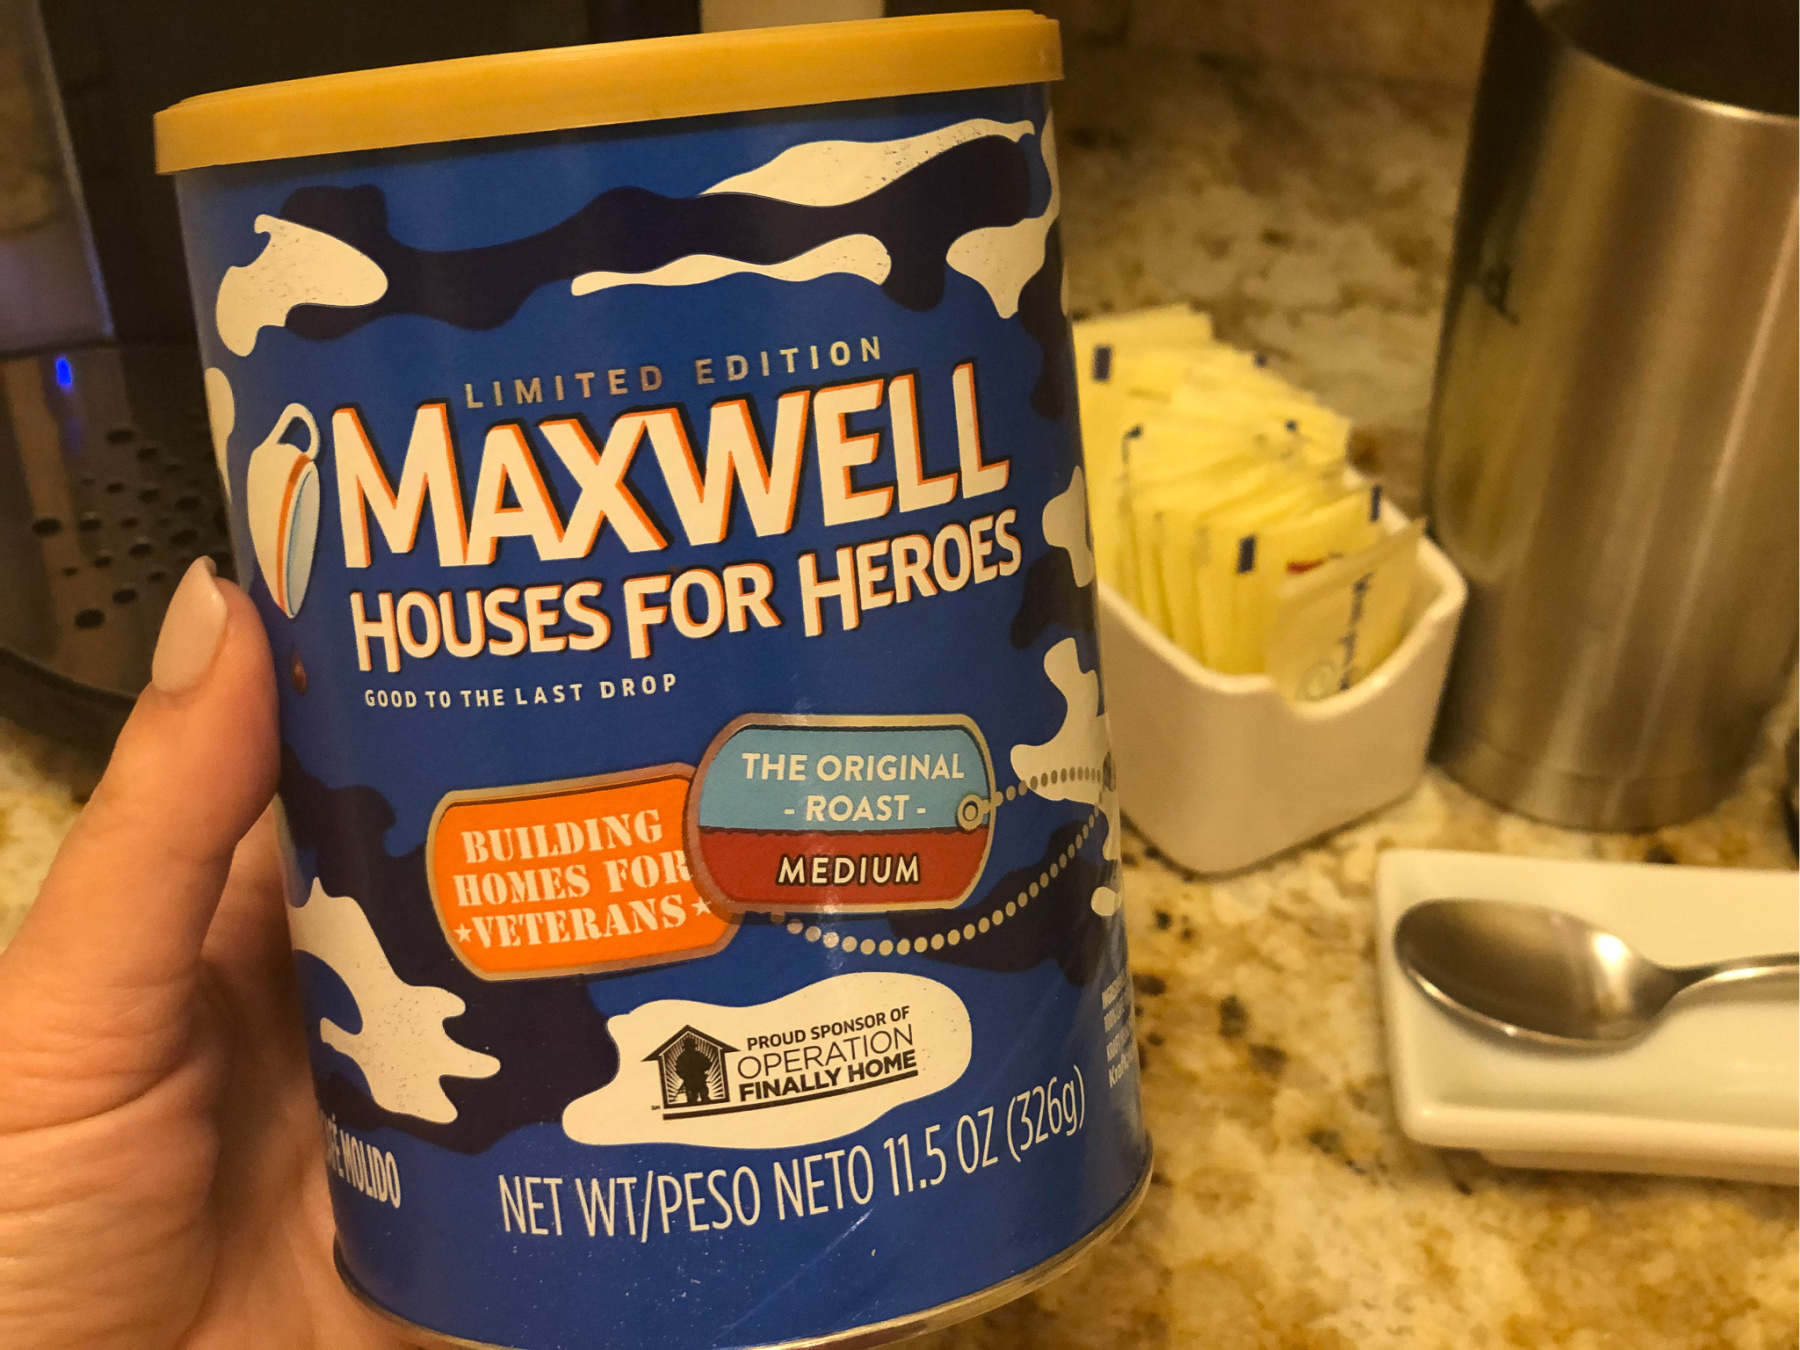 Can't-Miss Deal On Maxwell House Coffee - Buy One, Get One FREE At Publix! on I Heart Publix 1